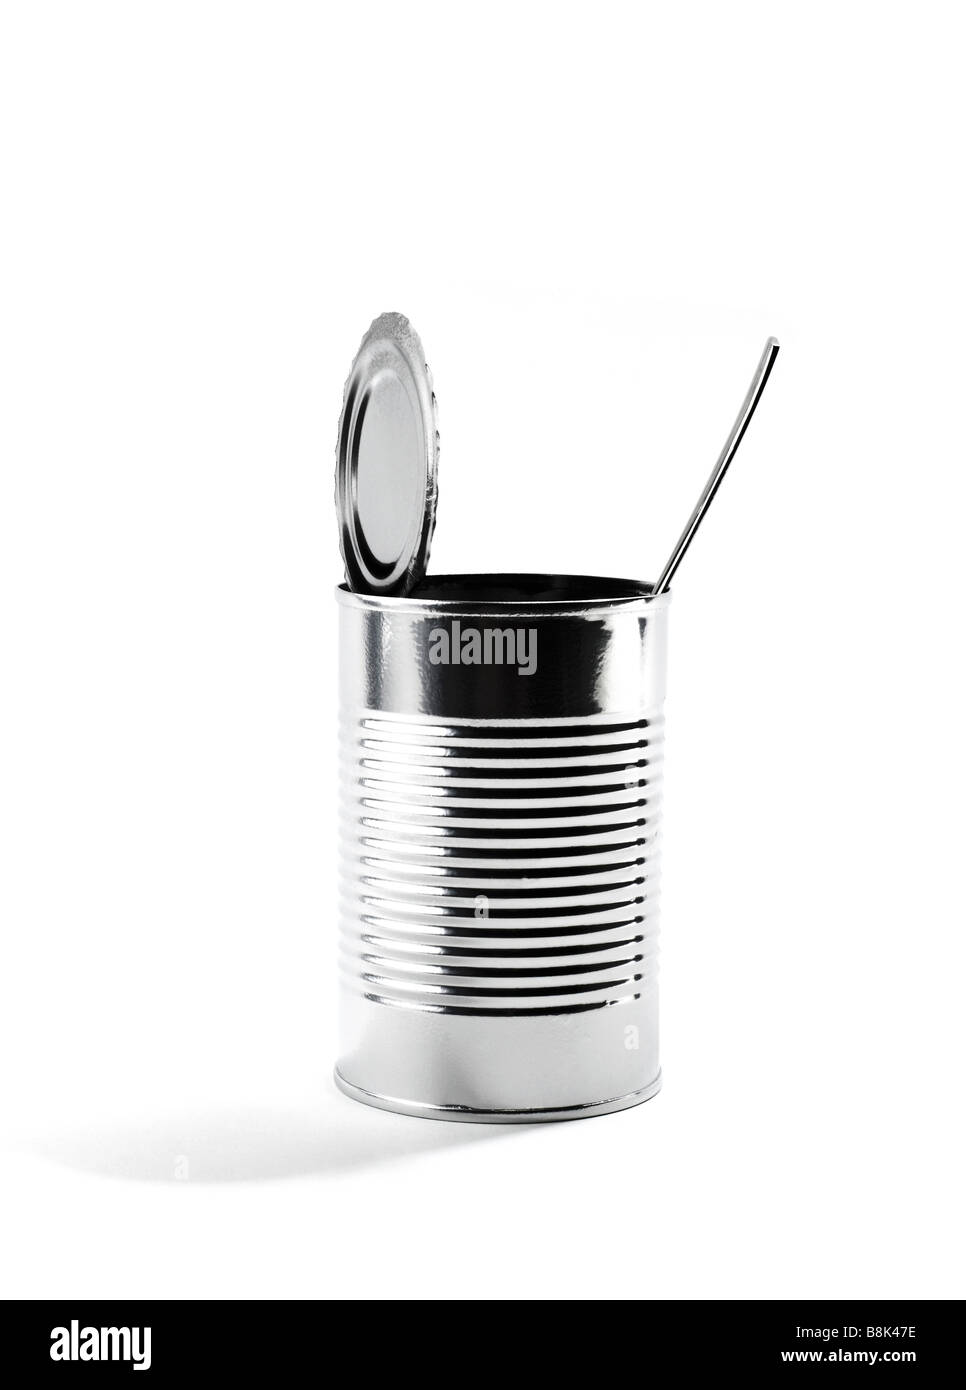 Open tin can with silverware Stock Photo